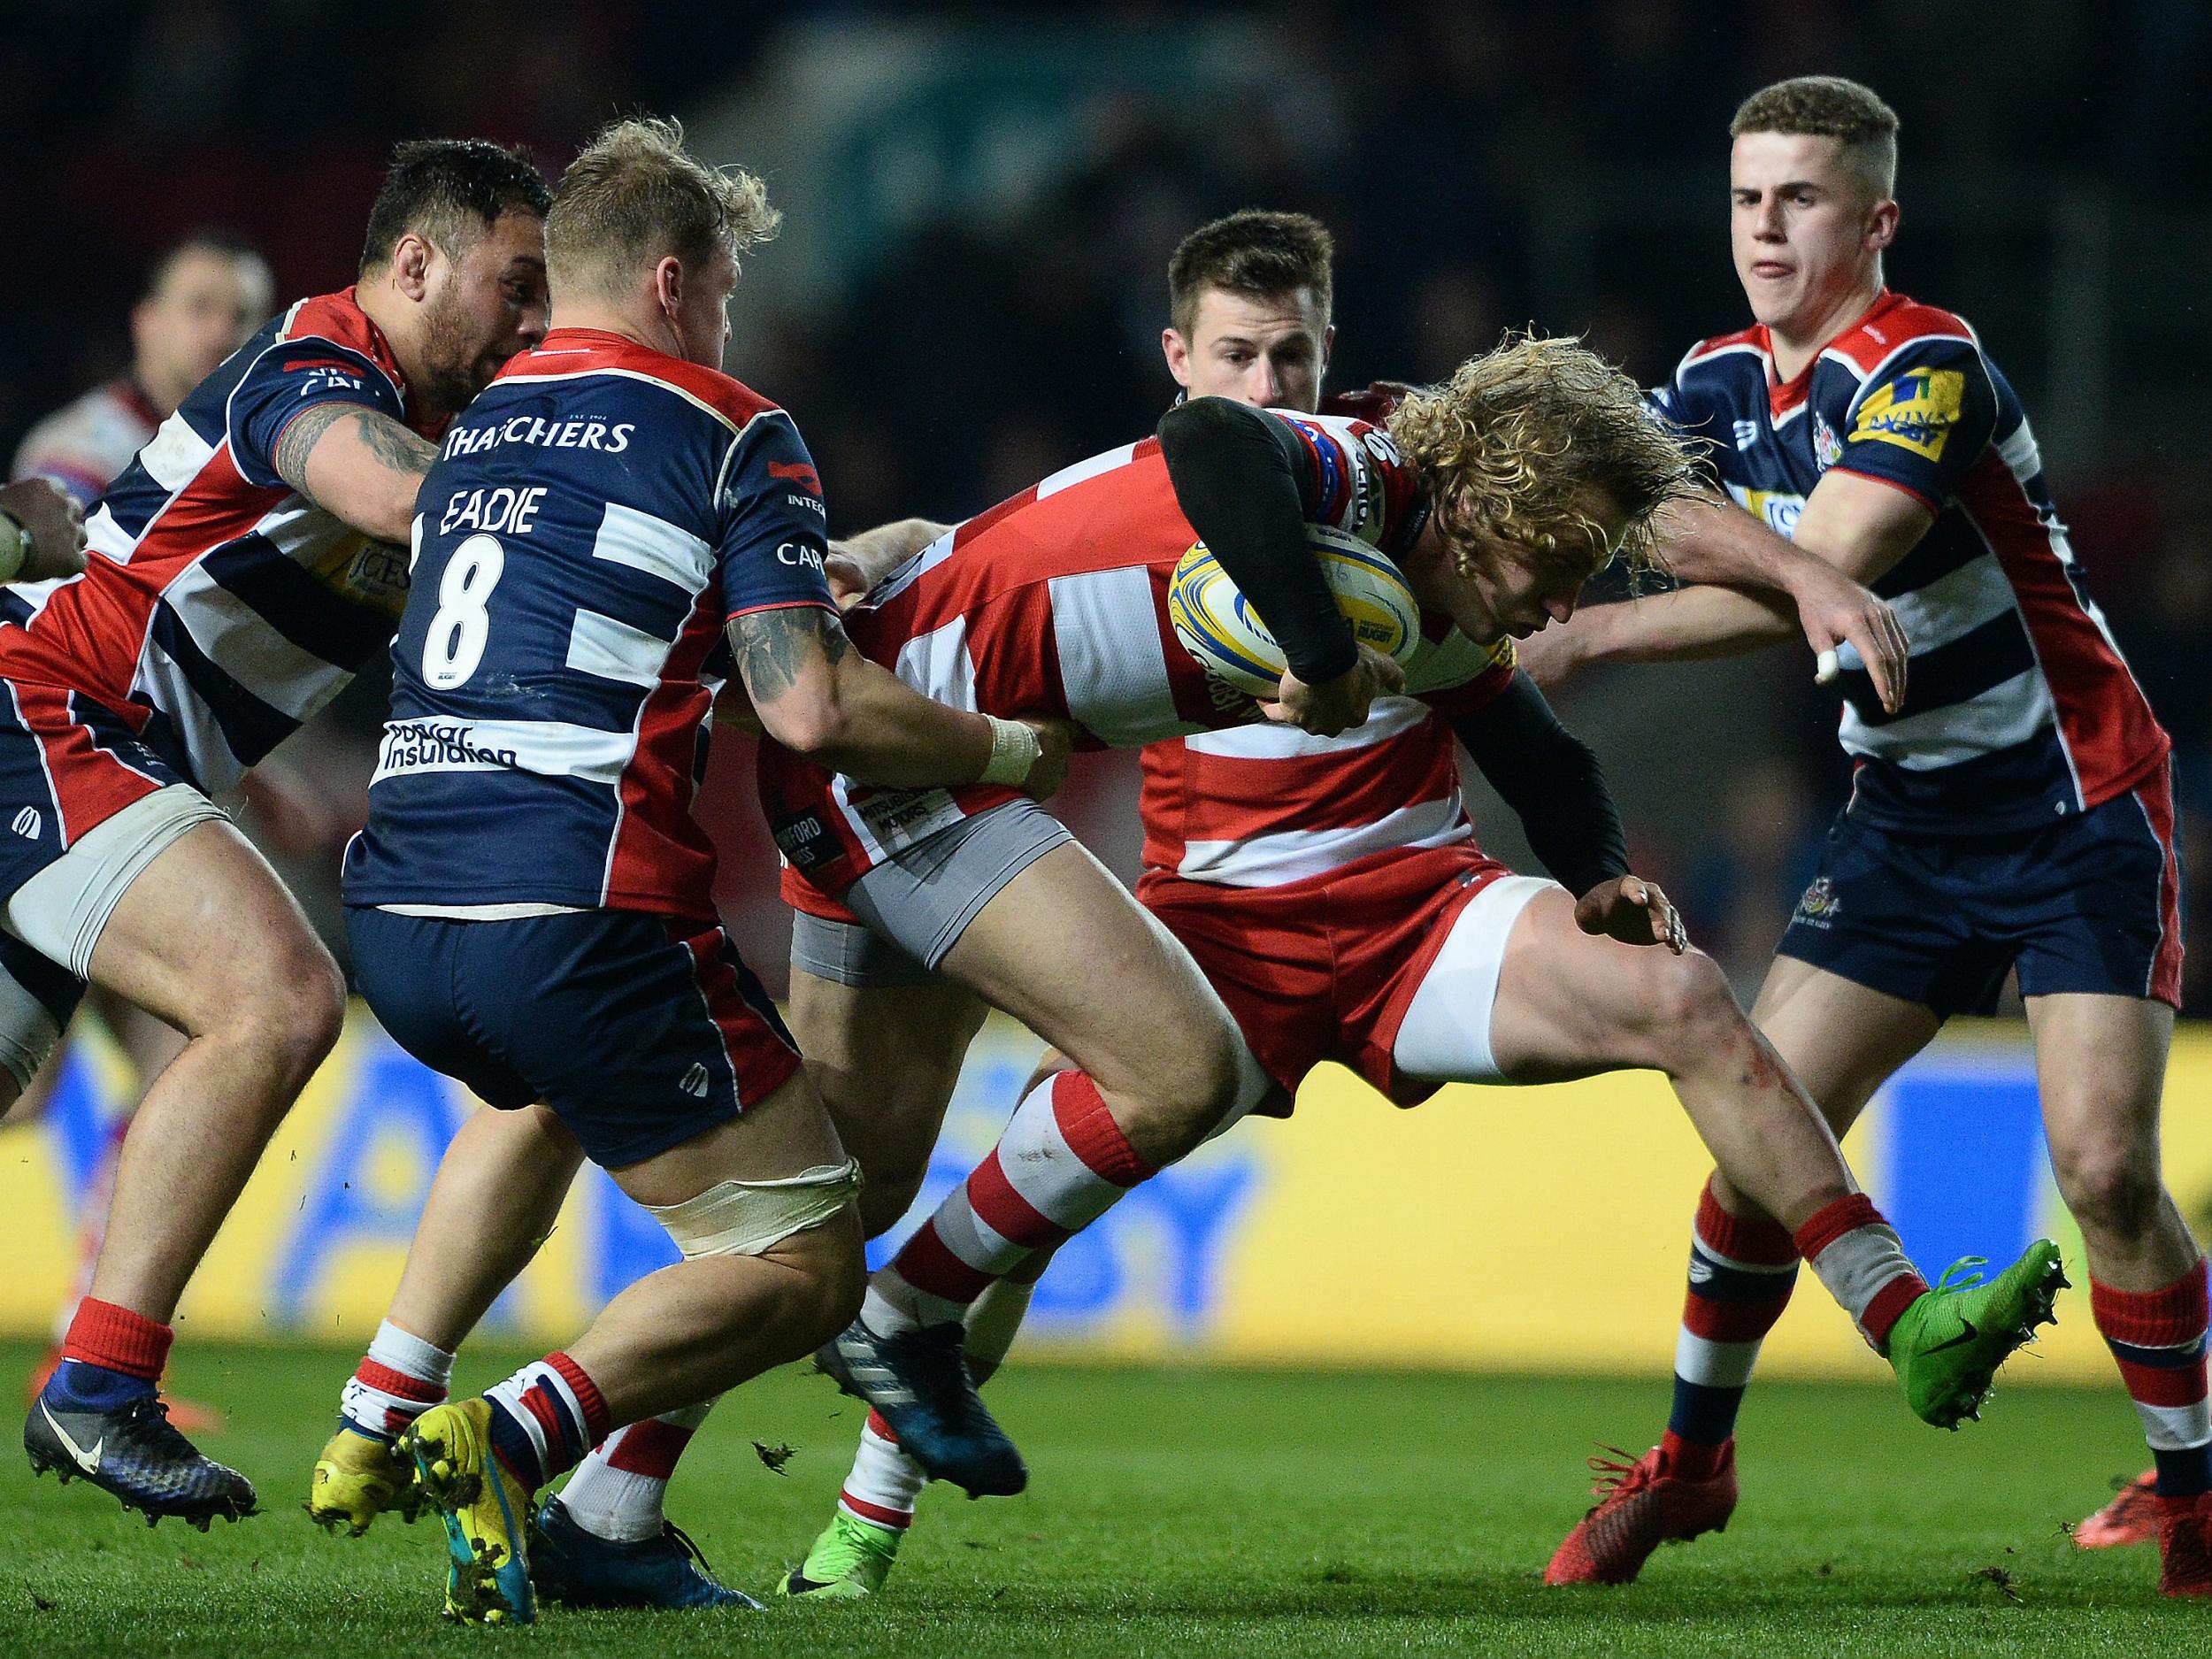 Billy Twelvetrees put in a powerful performance